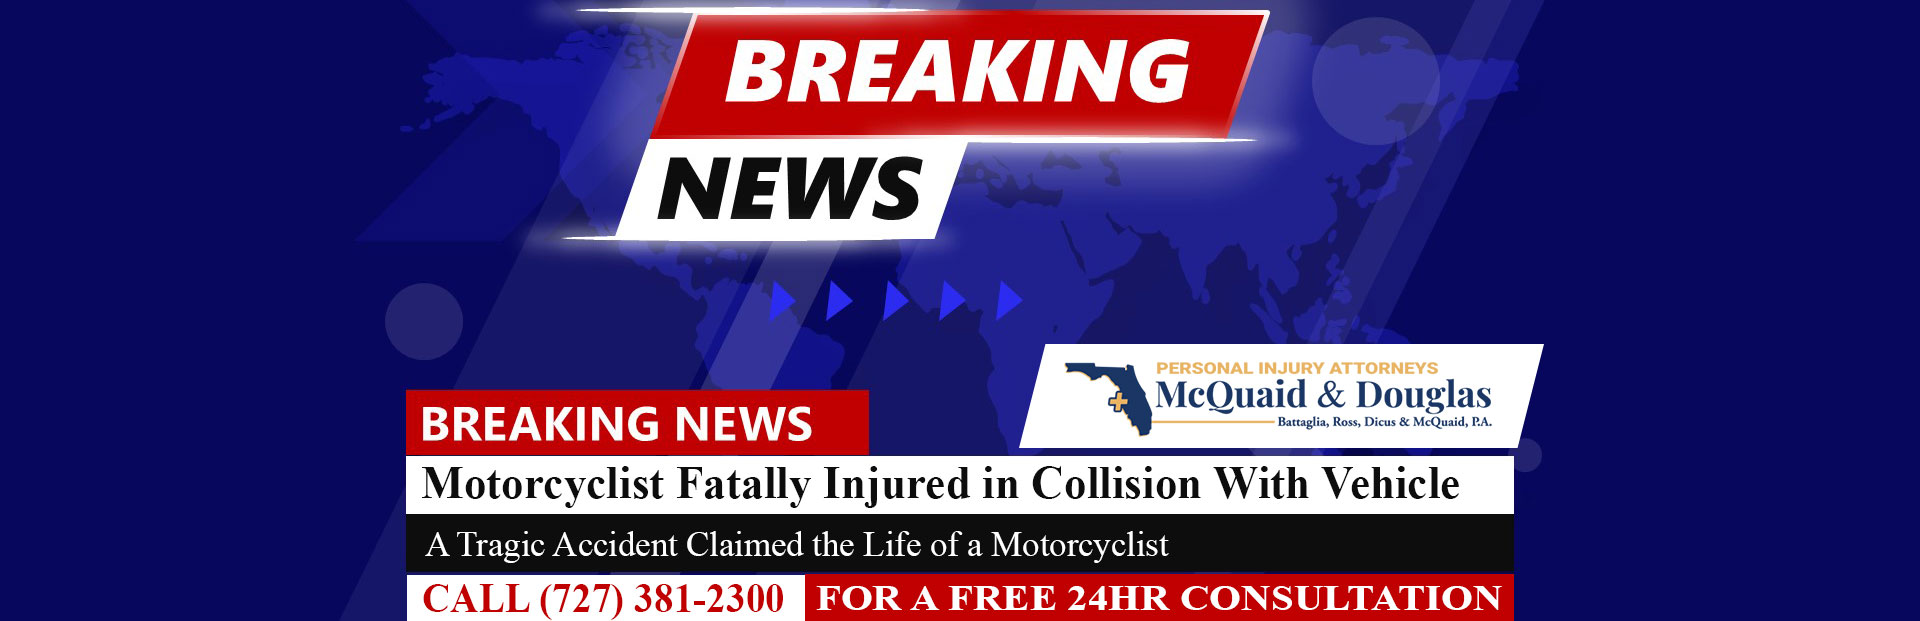 [08-01-23] Motorcyclist Fatally Injured in Collision With Vehicle on Ulmerton Road in Unincorporated Largo